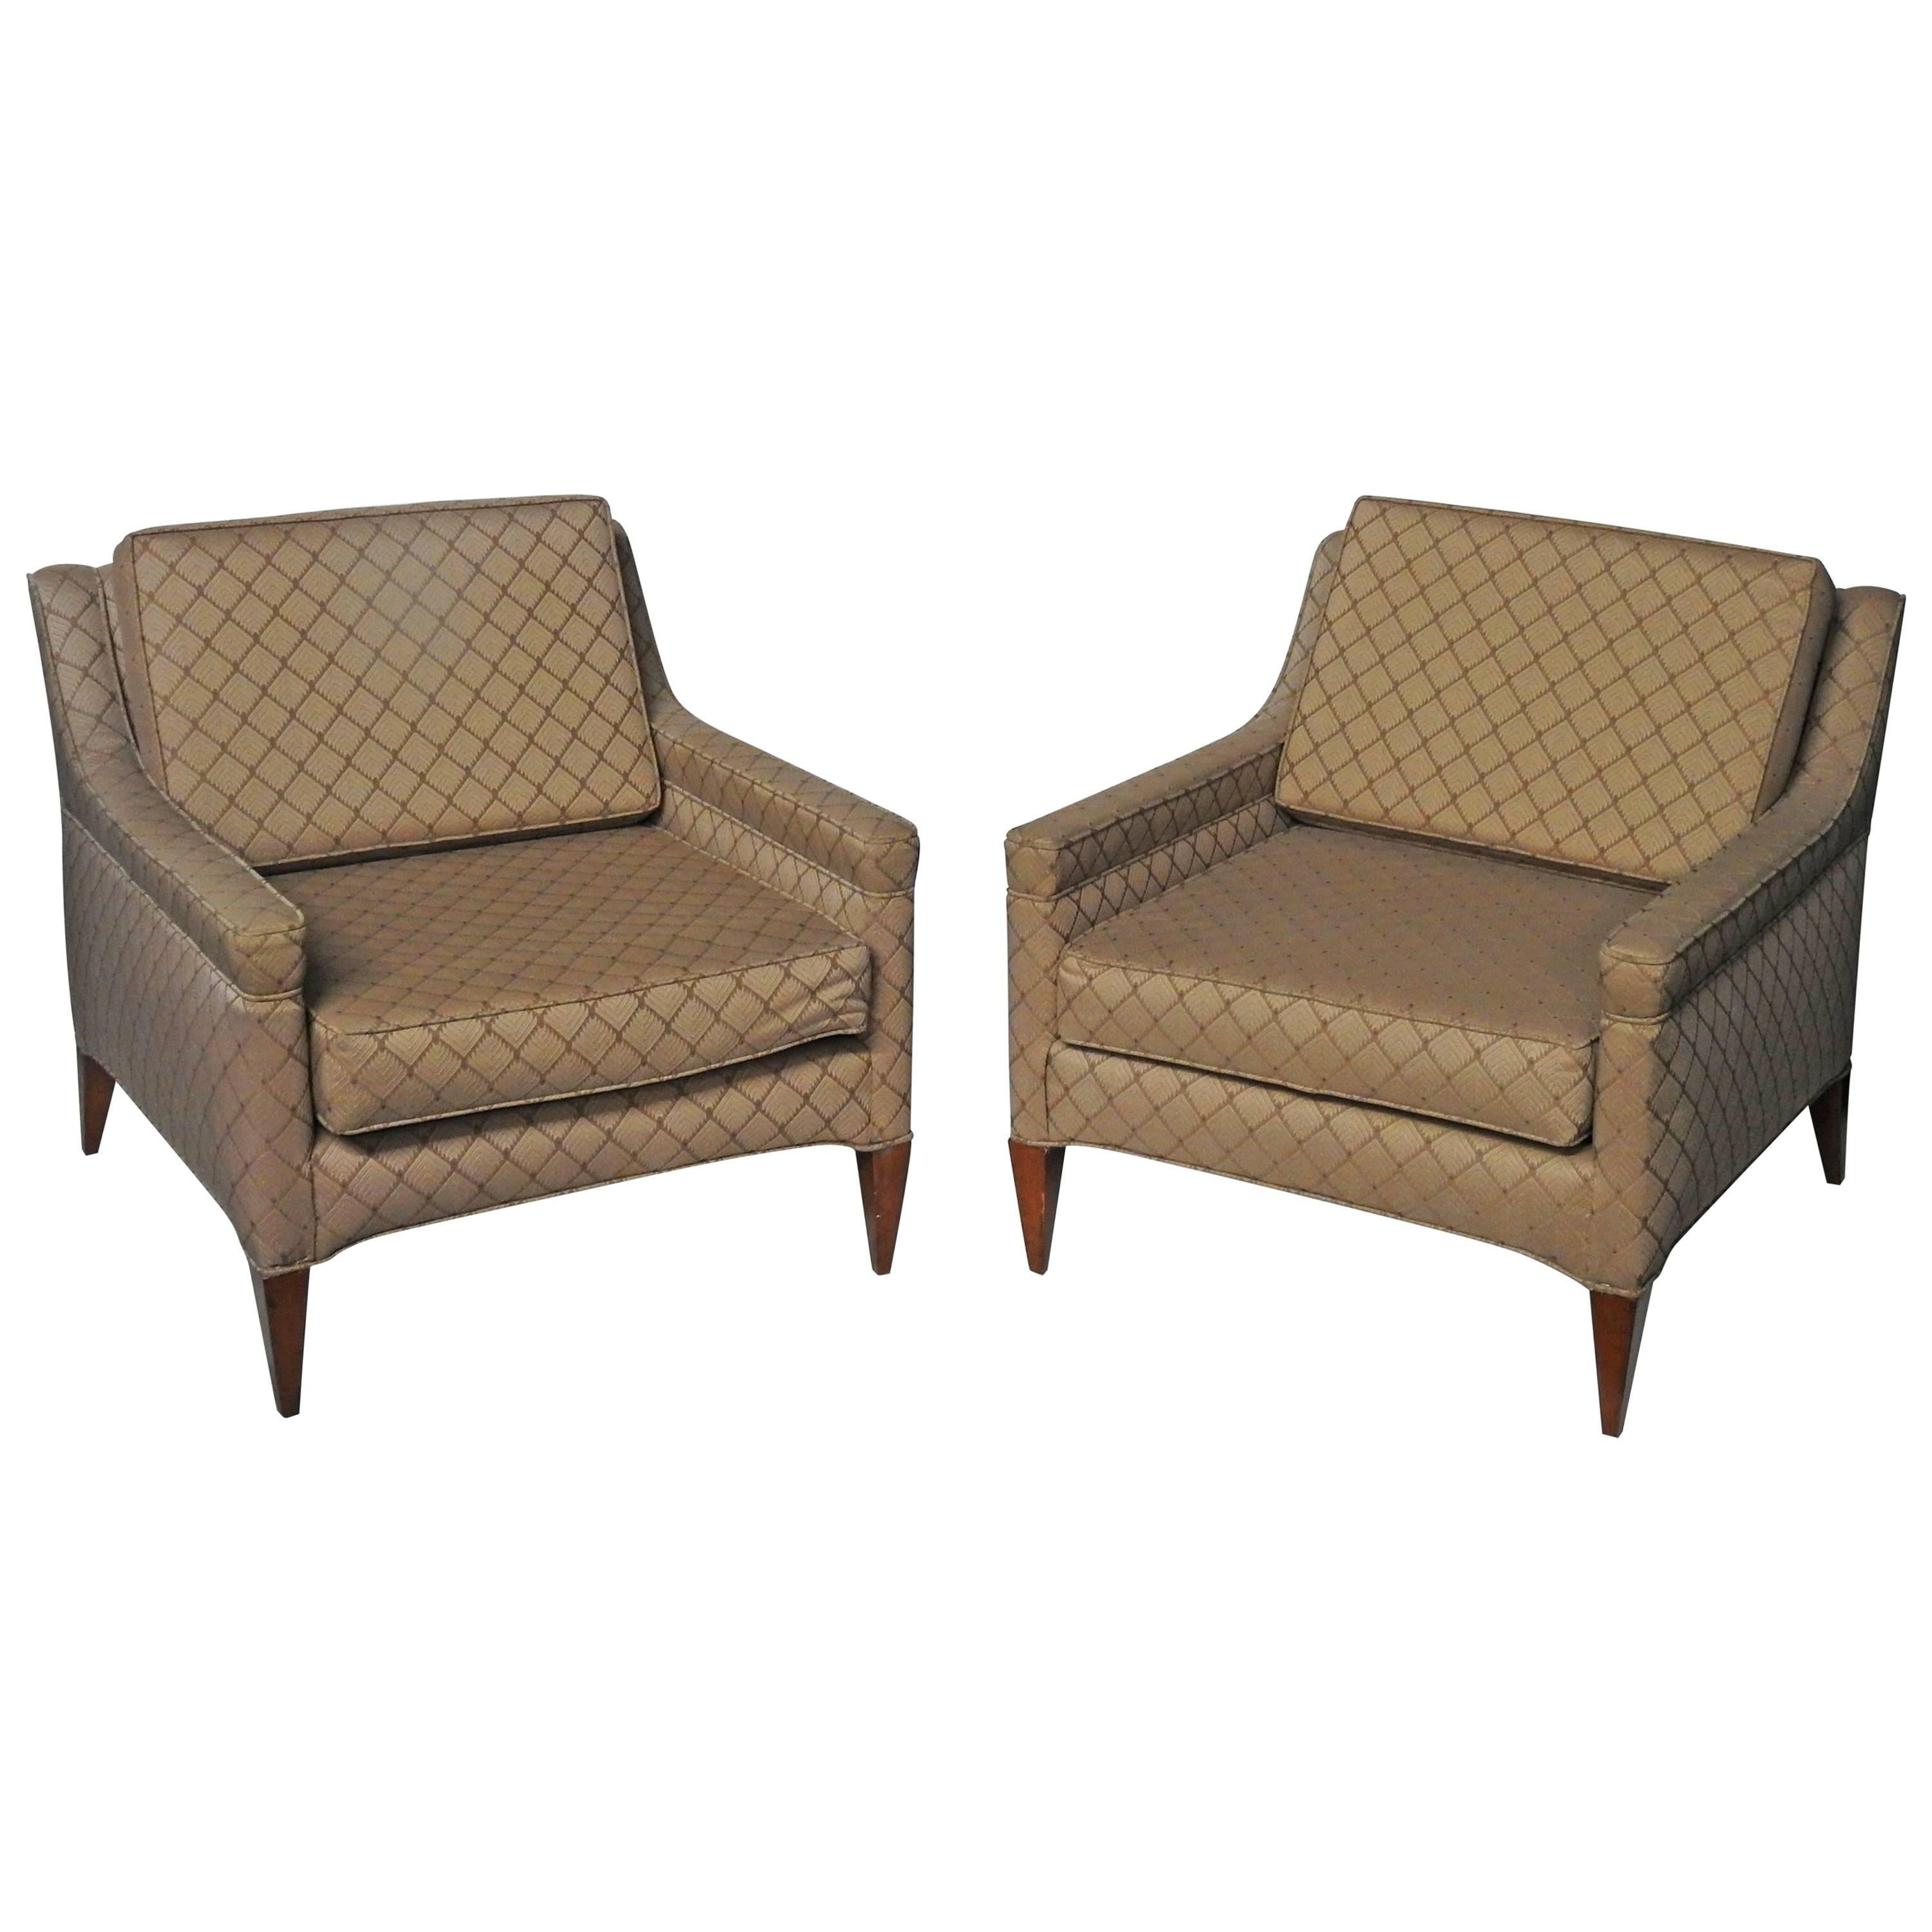 Pair of Mid-Century Modern Club Chairs by Dunbar For Sale